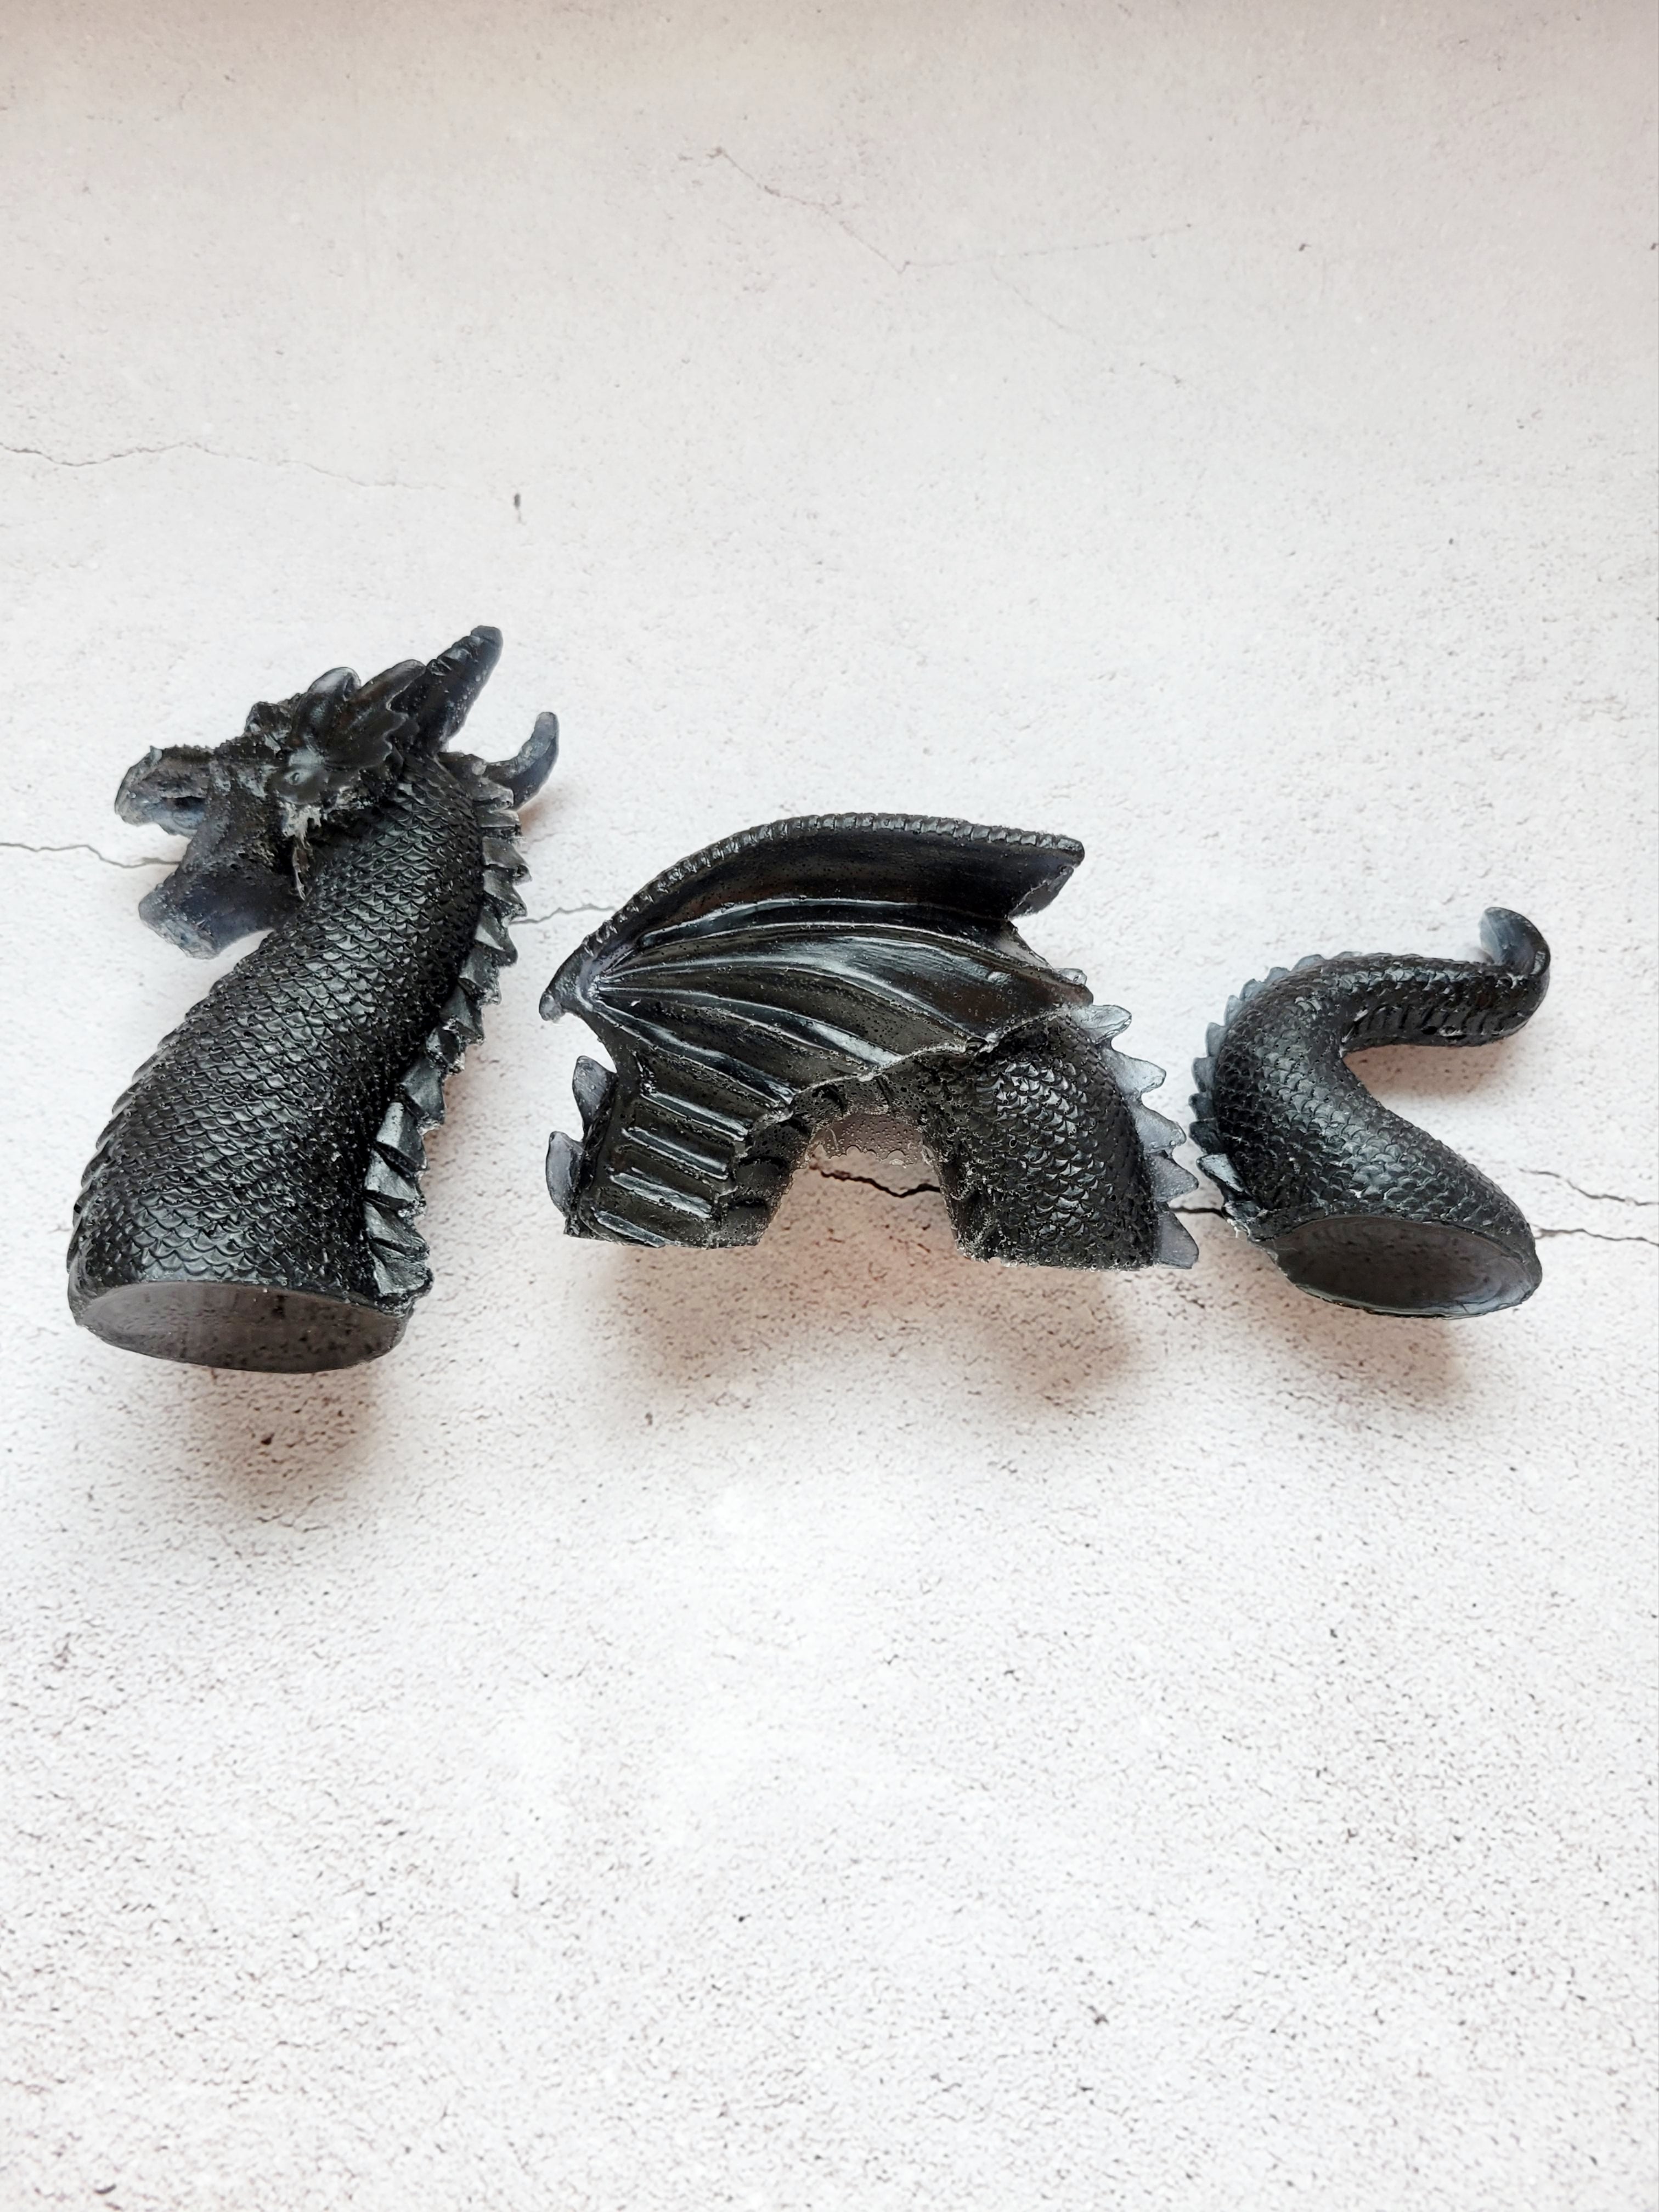 three piece resin sea serpent - Head, winged body, curved tail are all black. Top view of it laying on its side